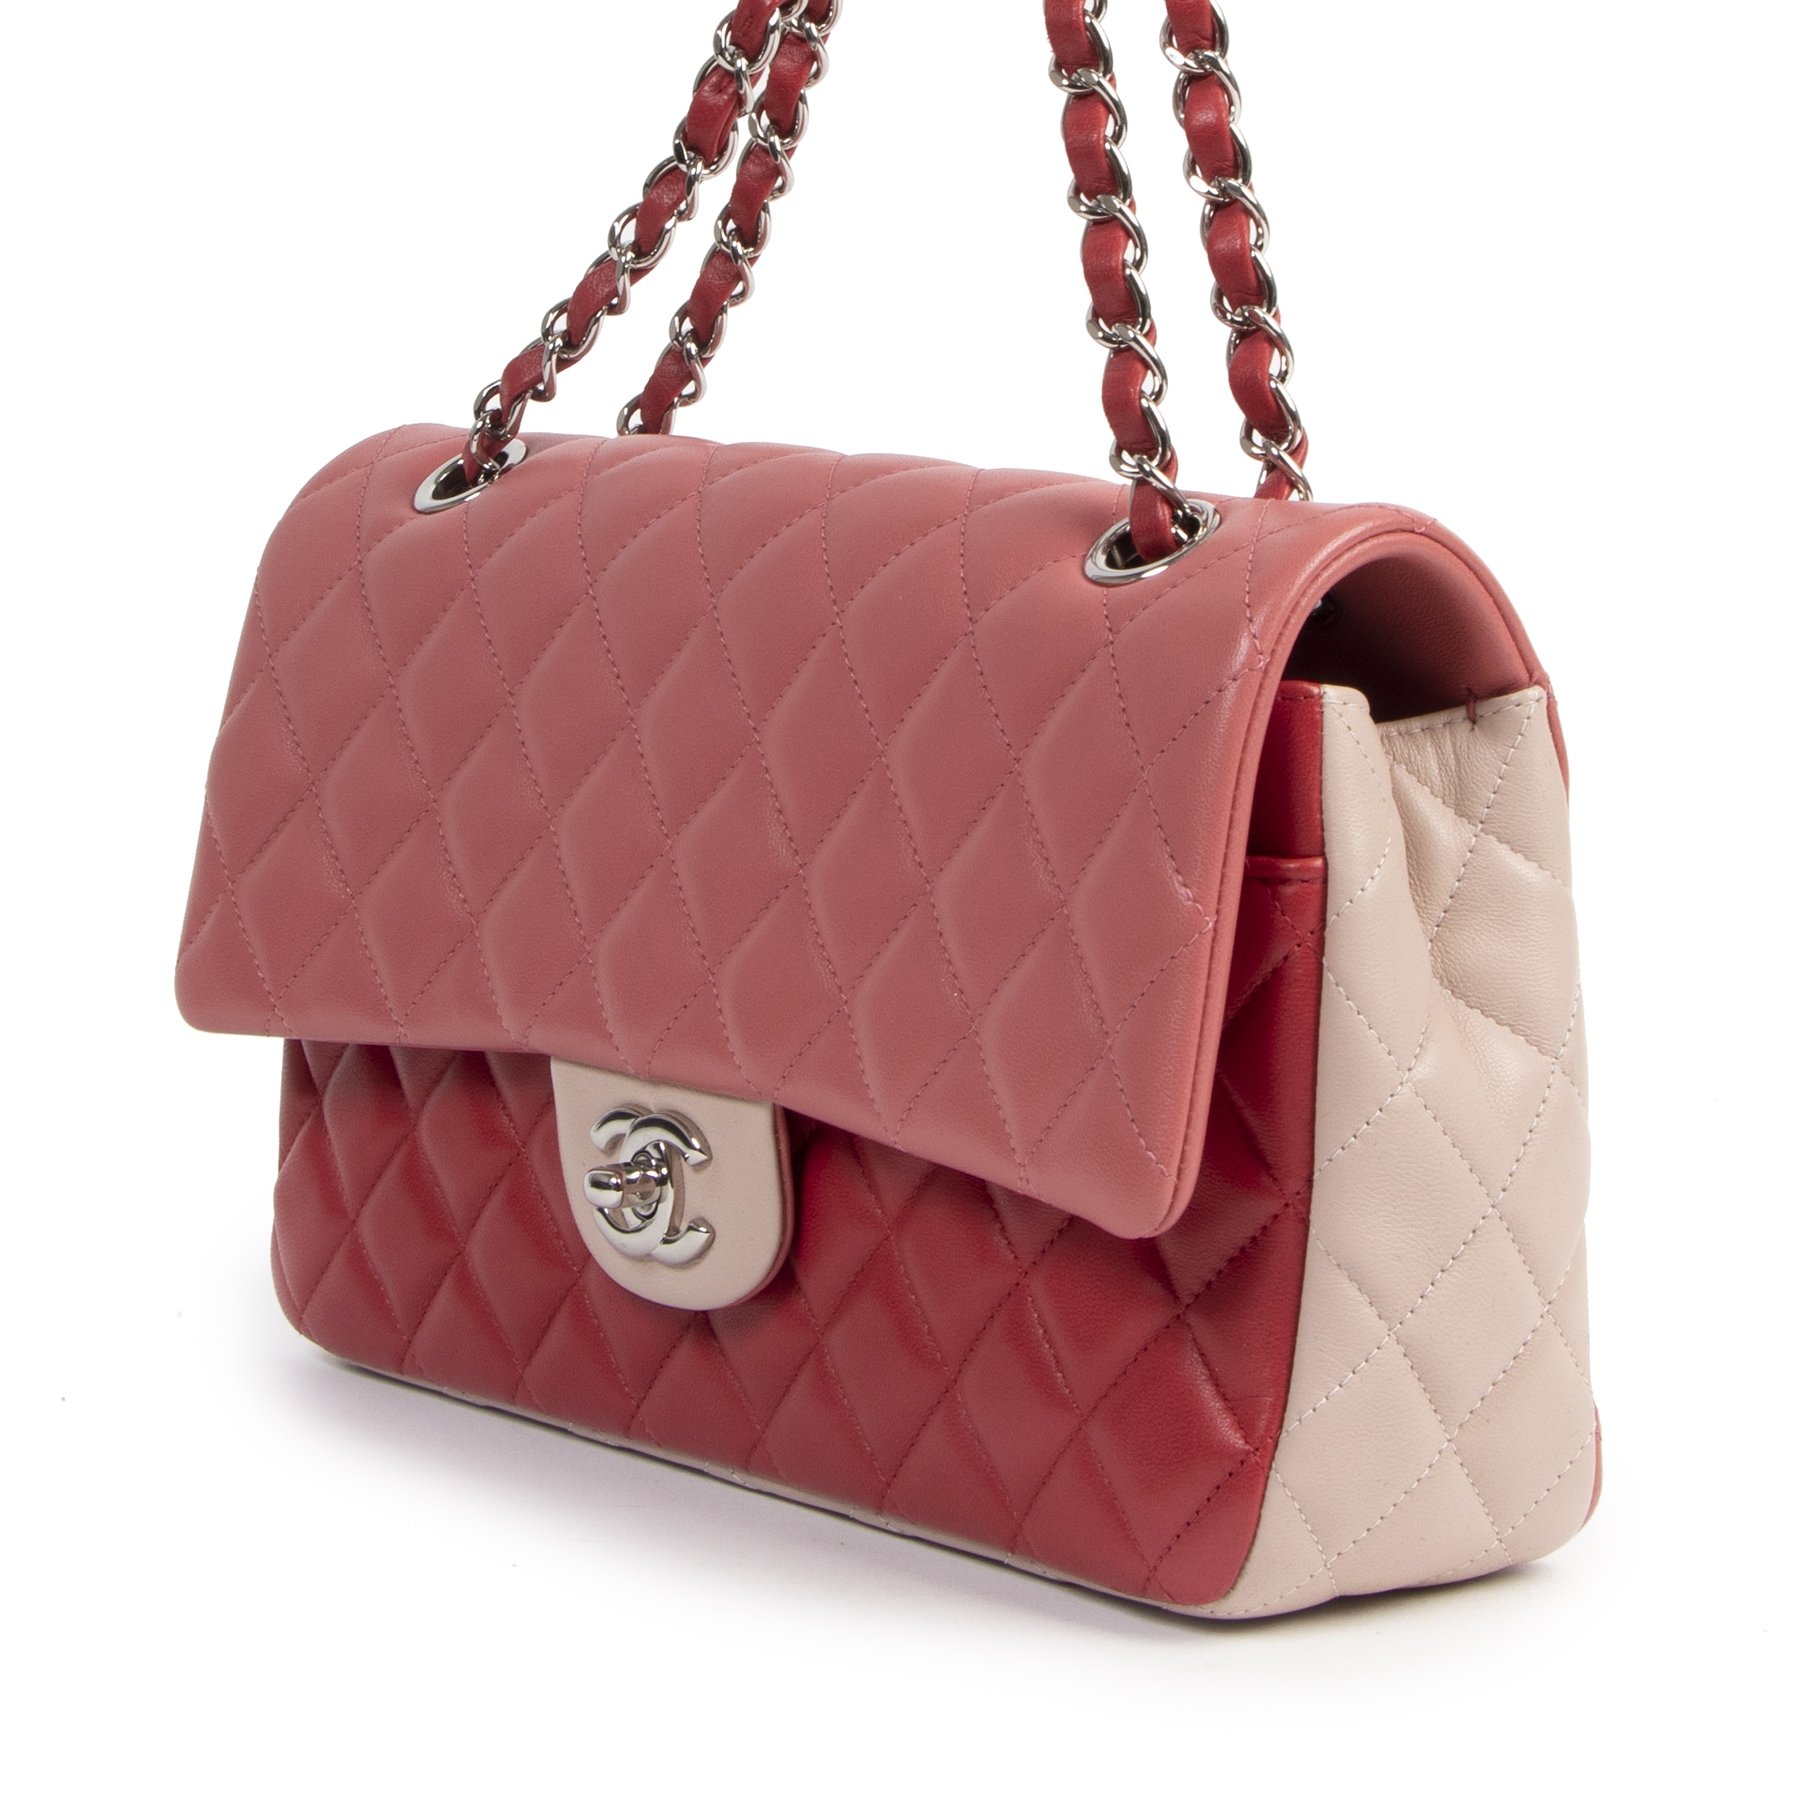 Chanel Tricolor Classic Jumbo Double Flap Bag - Red Shoulder Bags